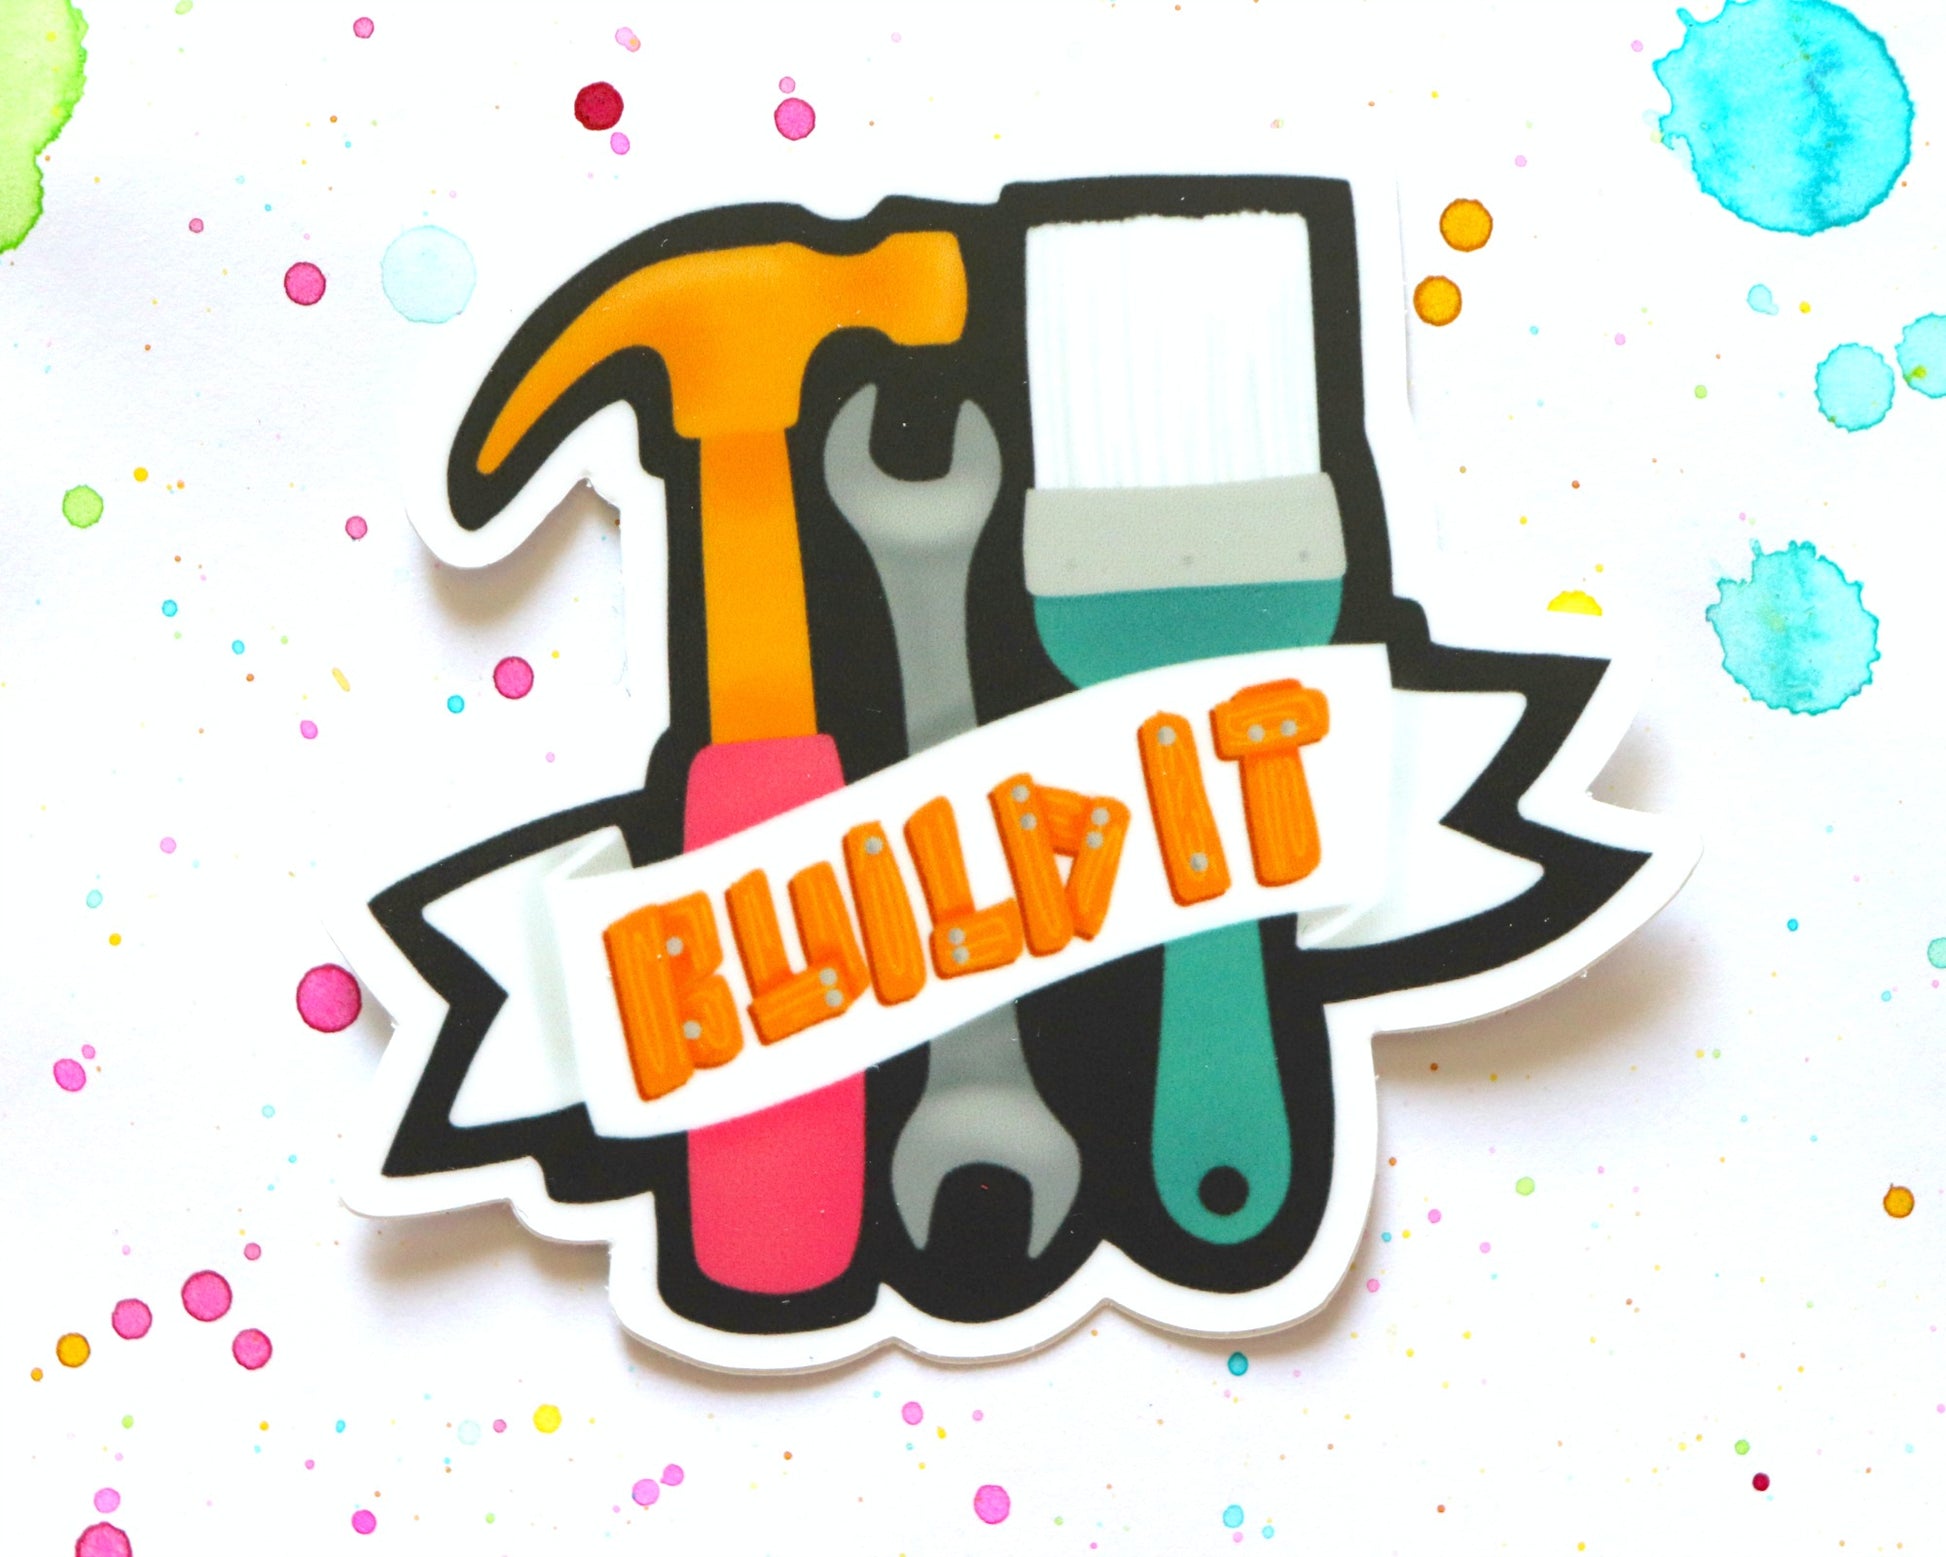 Built it tool stickers